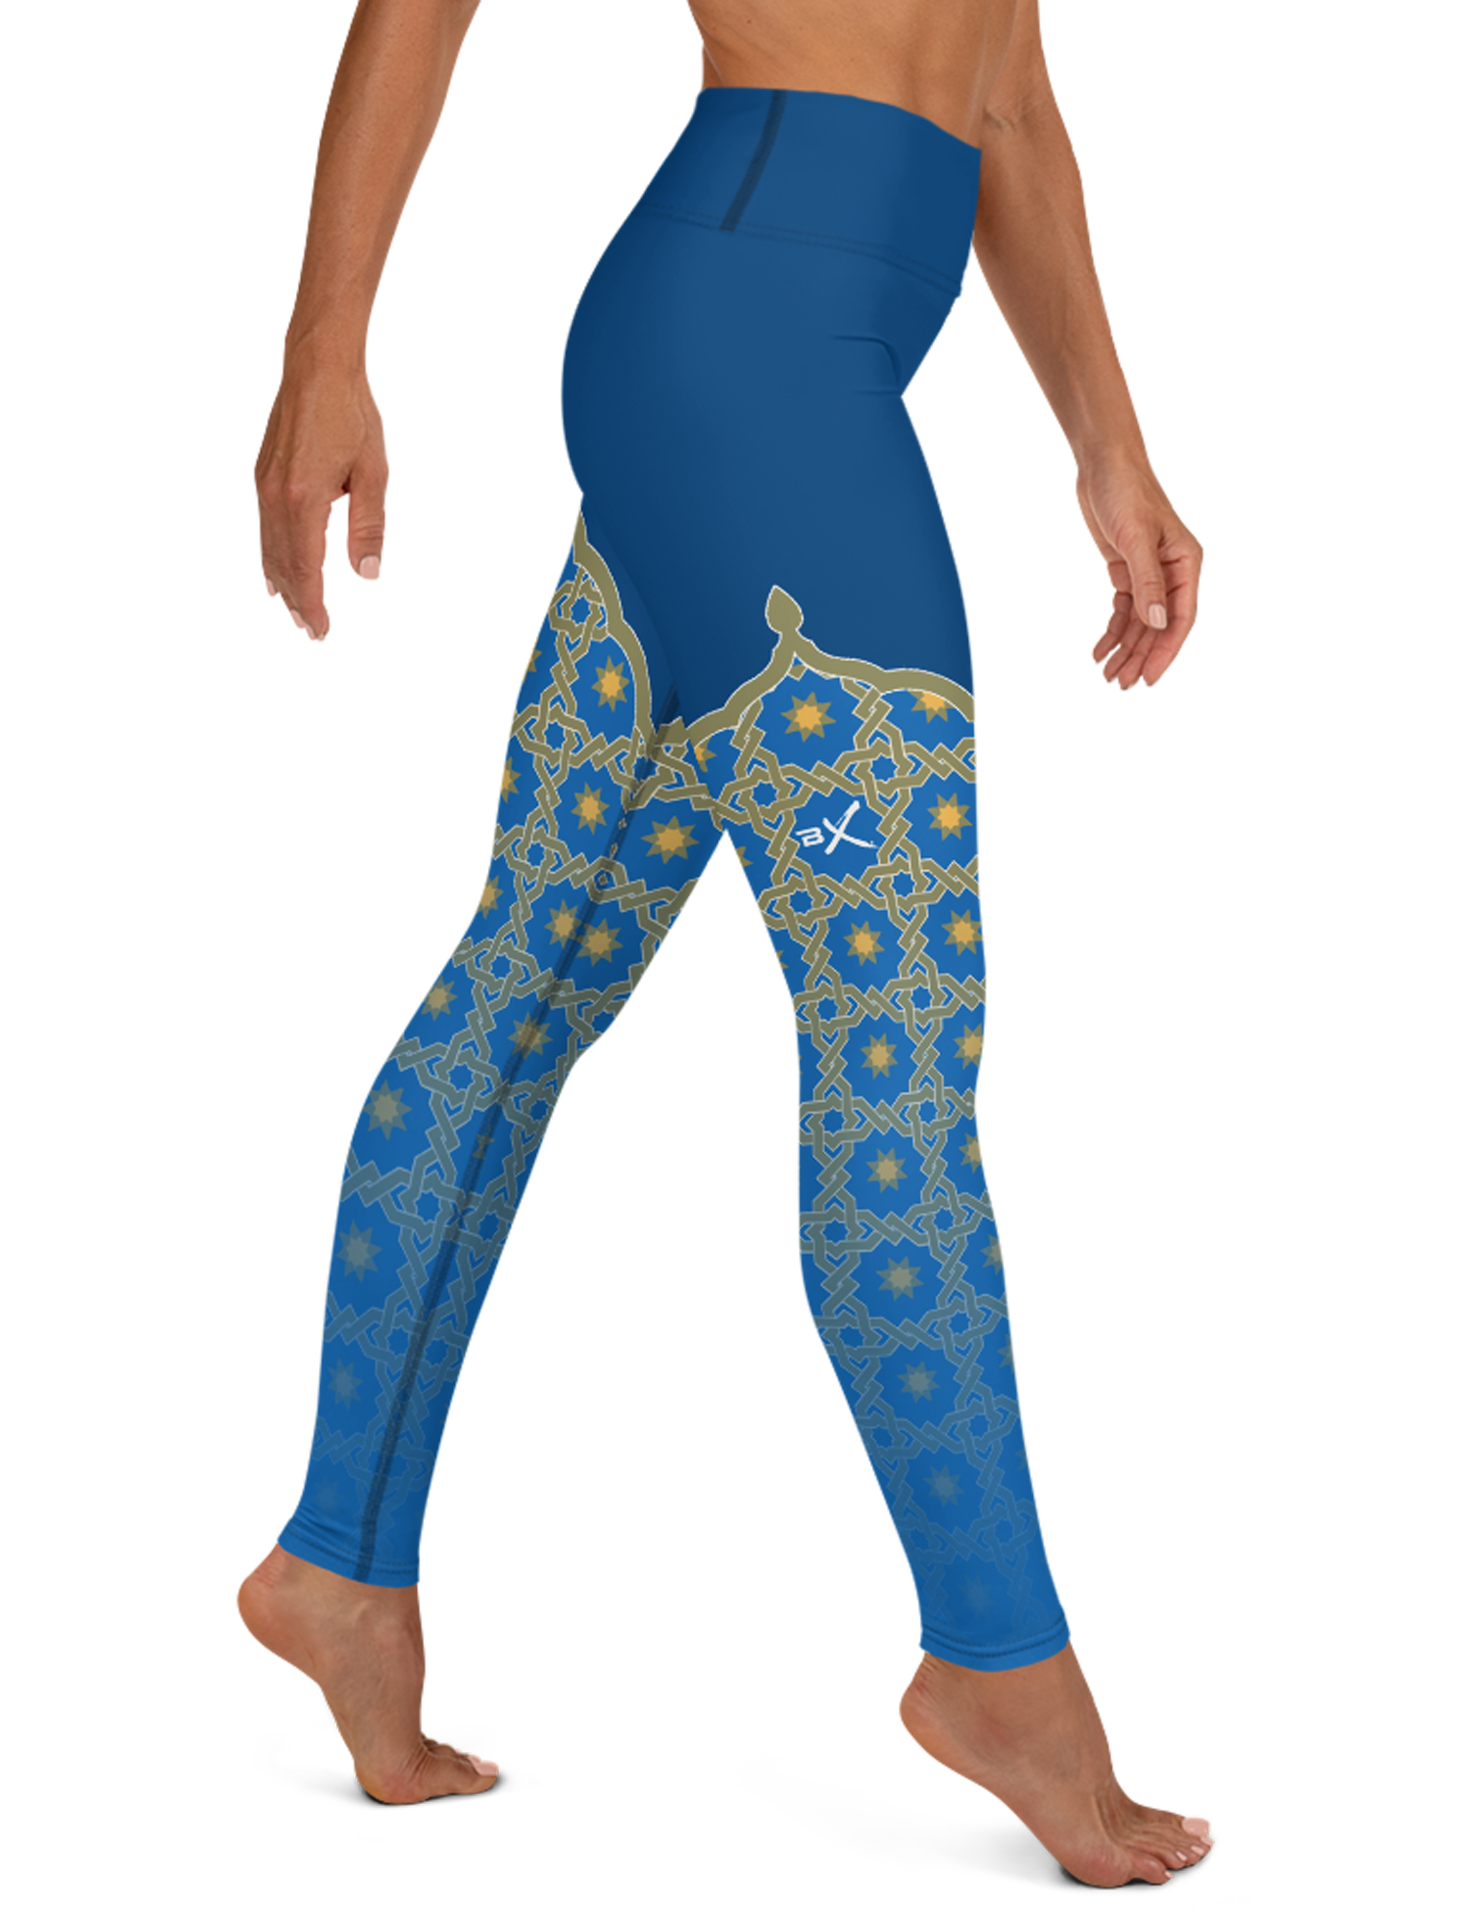 Indian Palace Architecture Leggings - BollyX the Bollywood Workout